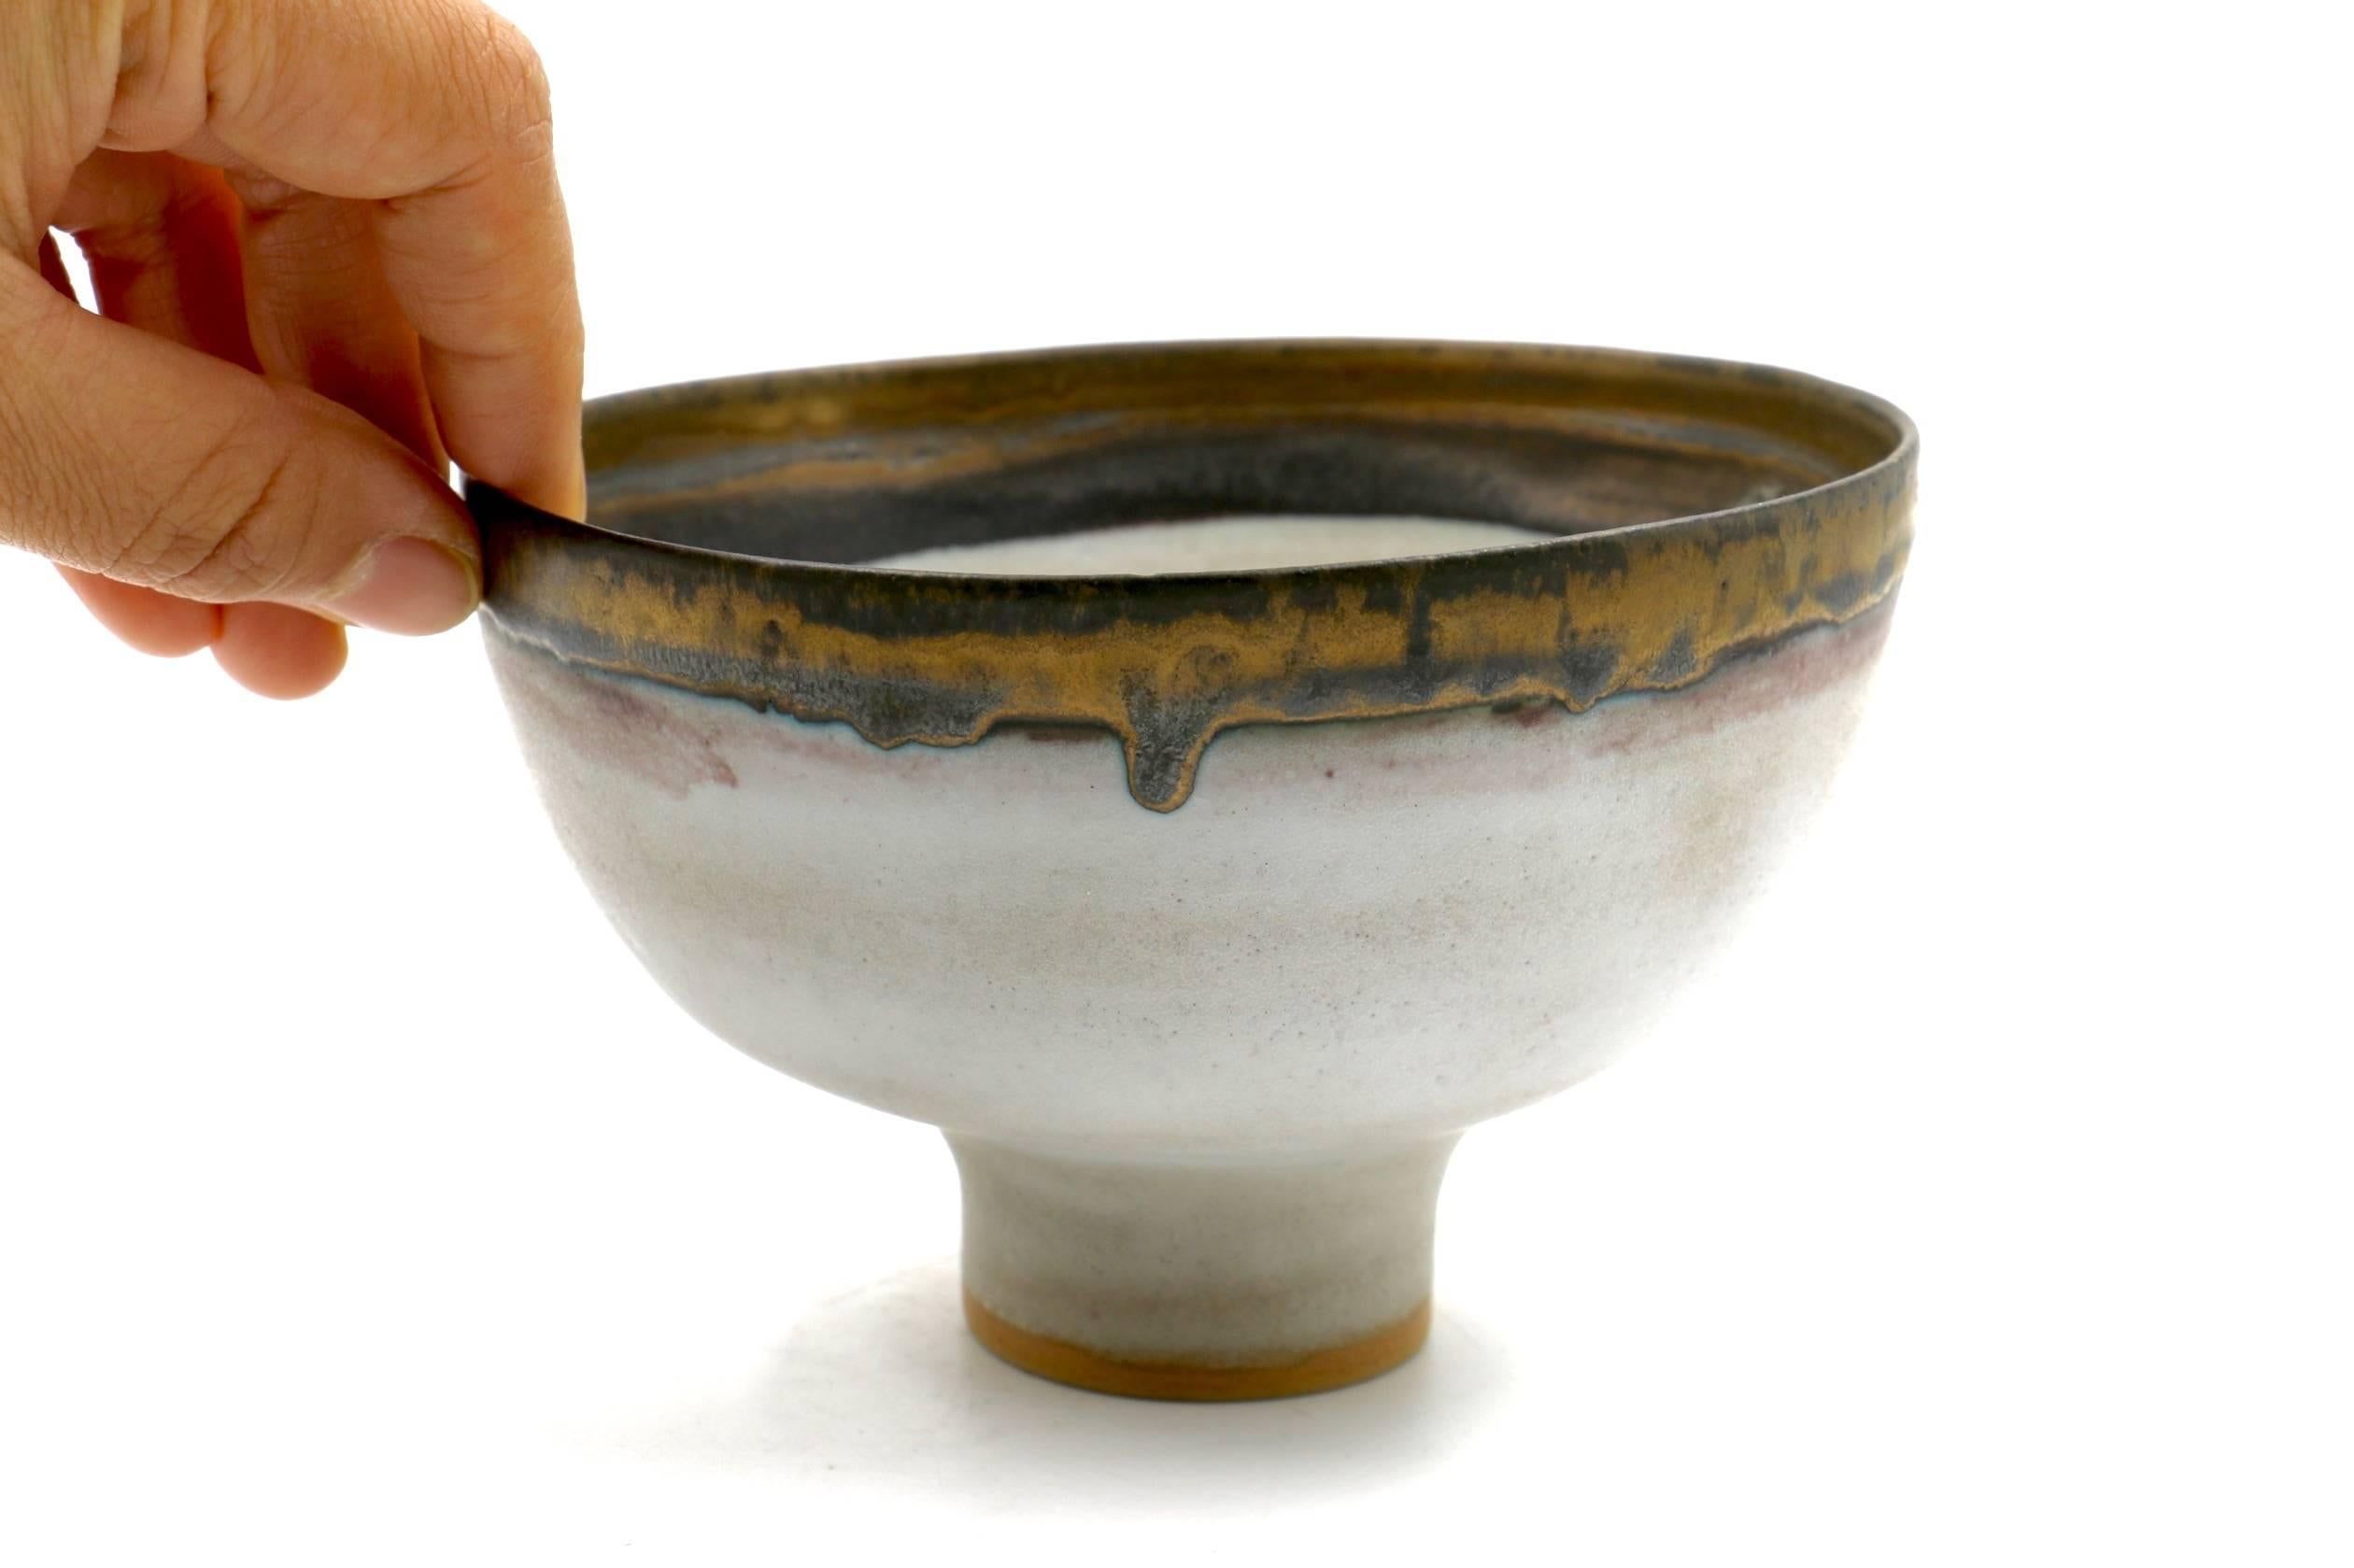 Tall-footed bowl with Artist initials at the bottom of the bowl. Rare, beautiful example of Lucie Rie's delicate pottery. White glaze with bronze slip rim with mauve details under the rim. Measures 5 3/8 x 5 1/4 x 3 3/8 inches. Signed by the artist.